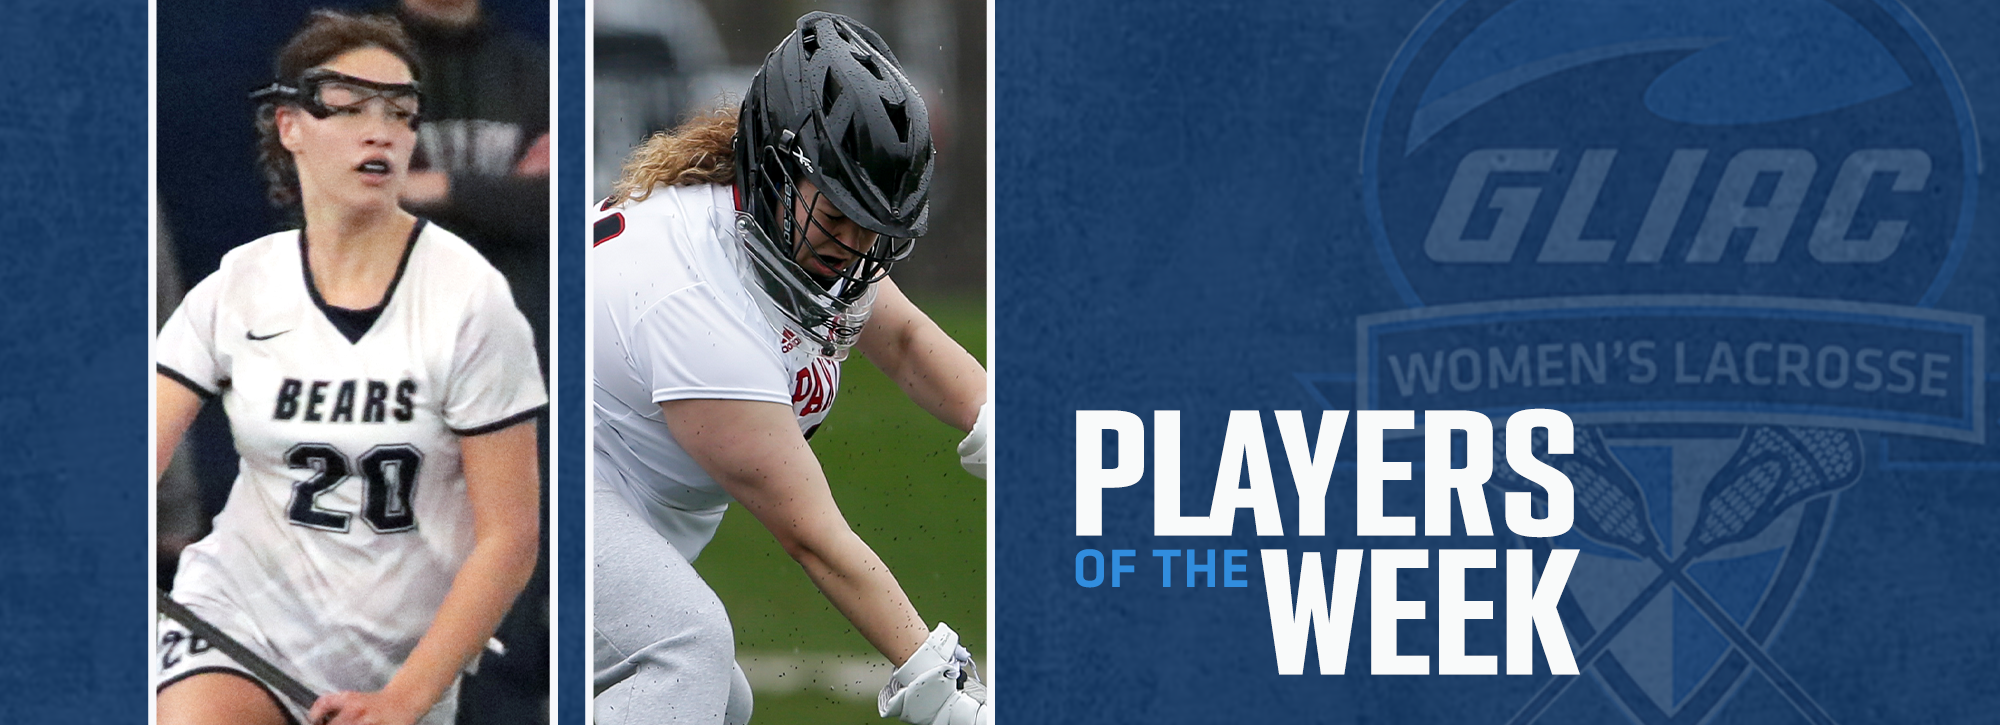 CSP's Sheets and DU's Latus earn women's lacrosse weekly honors